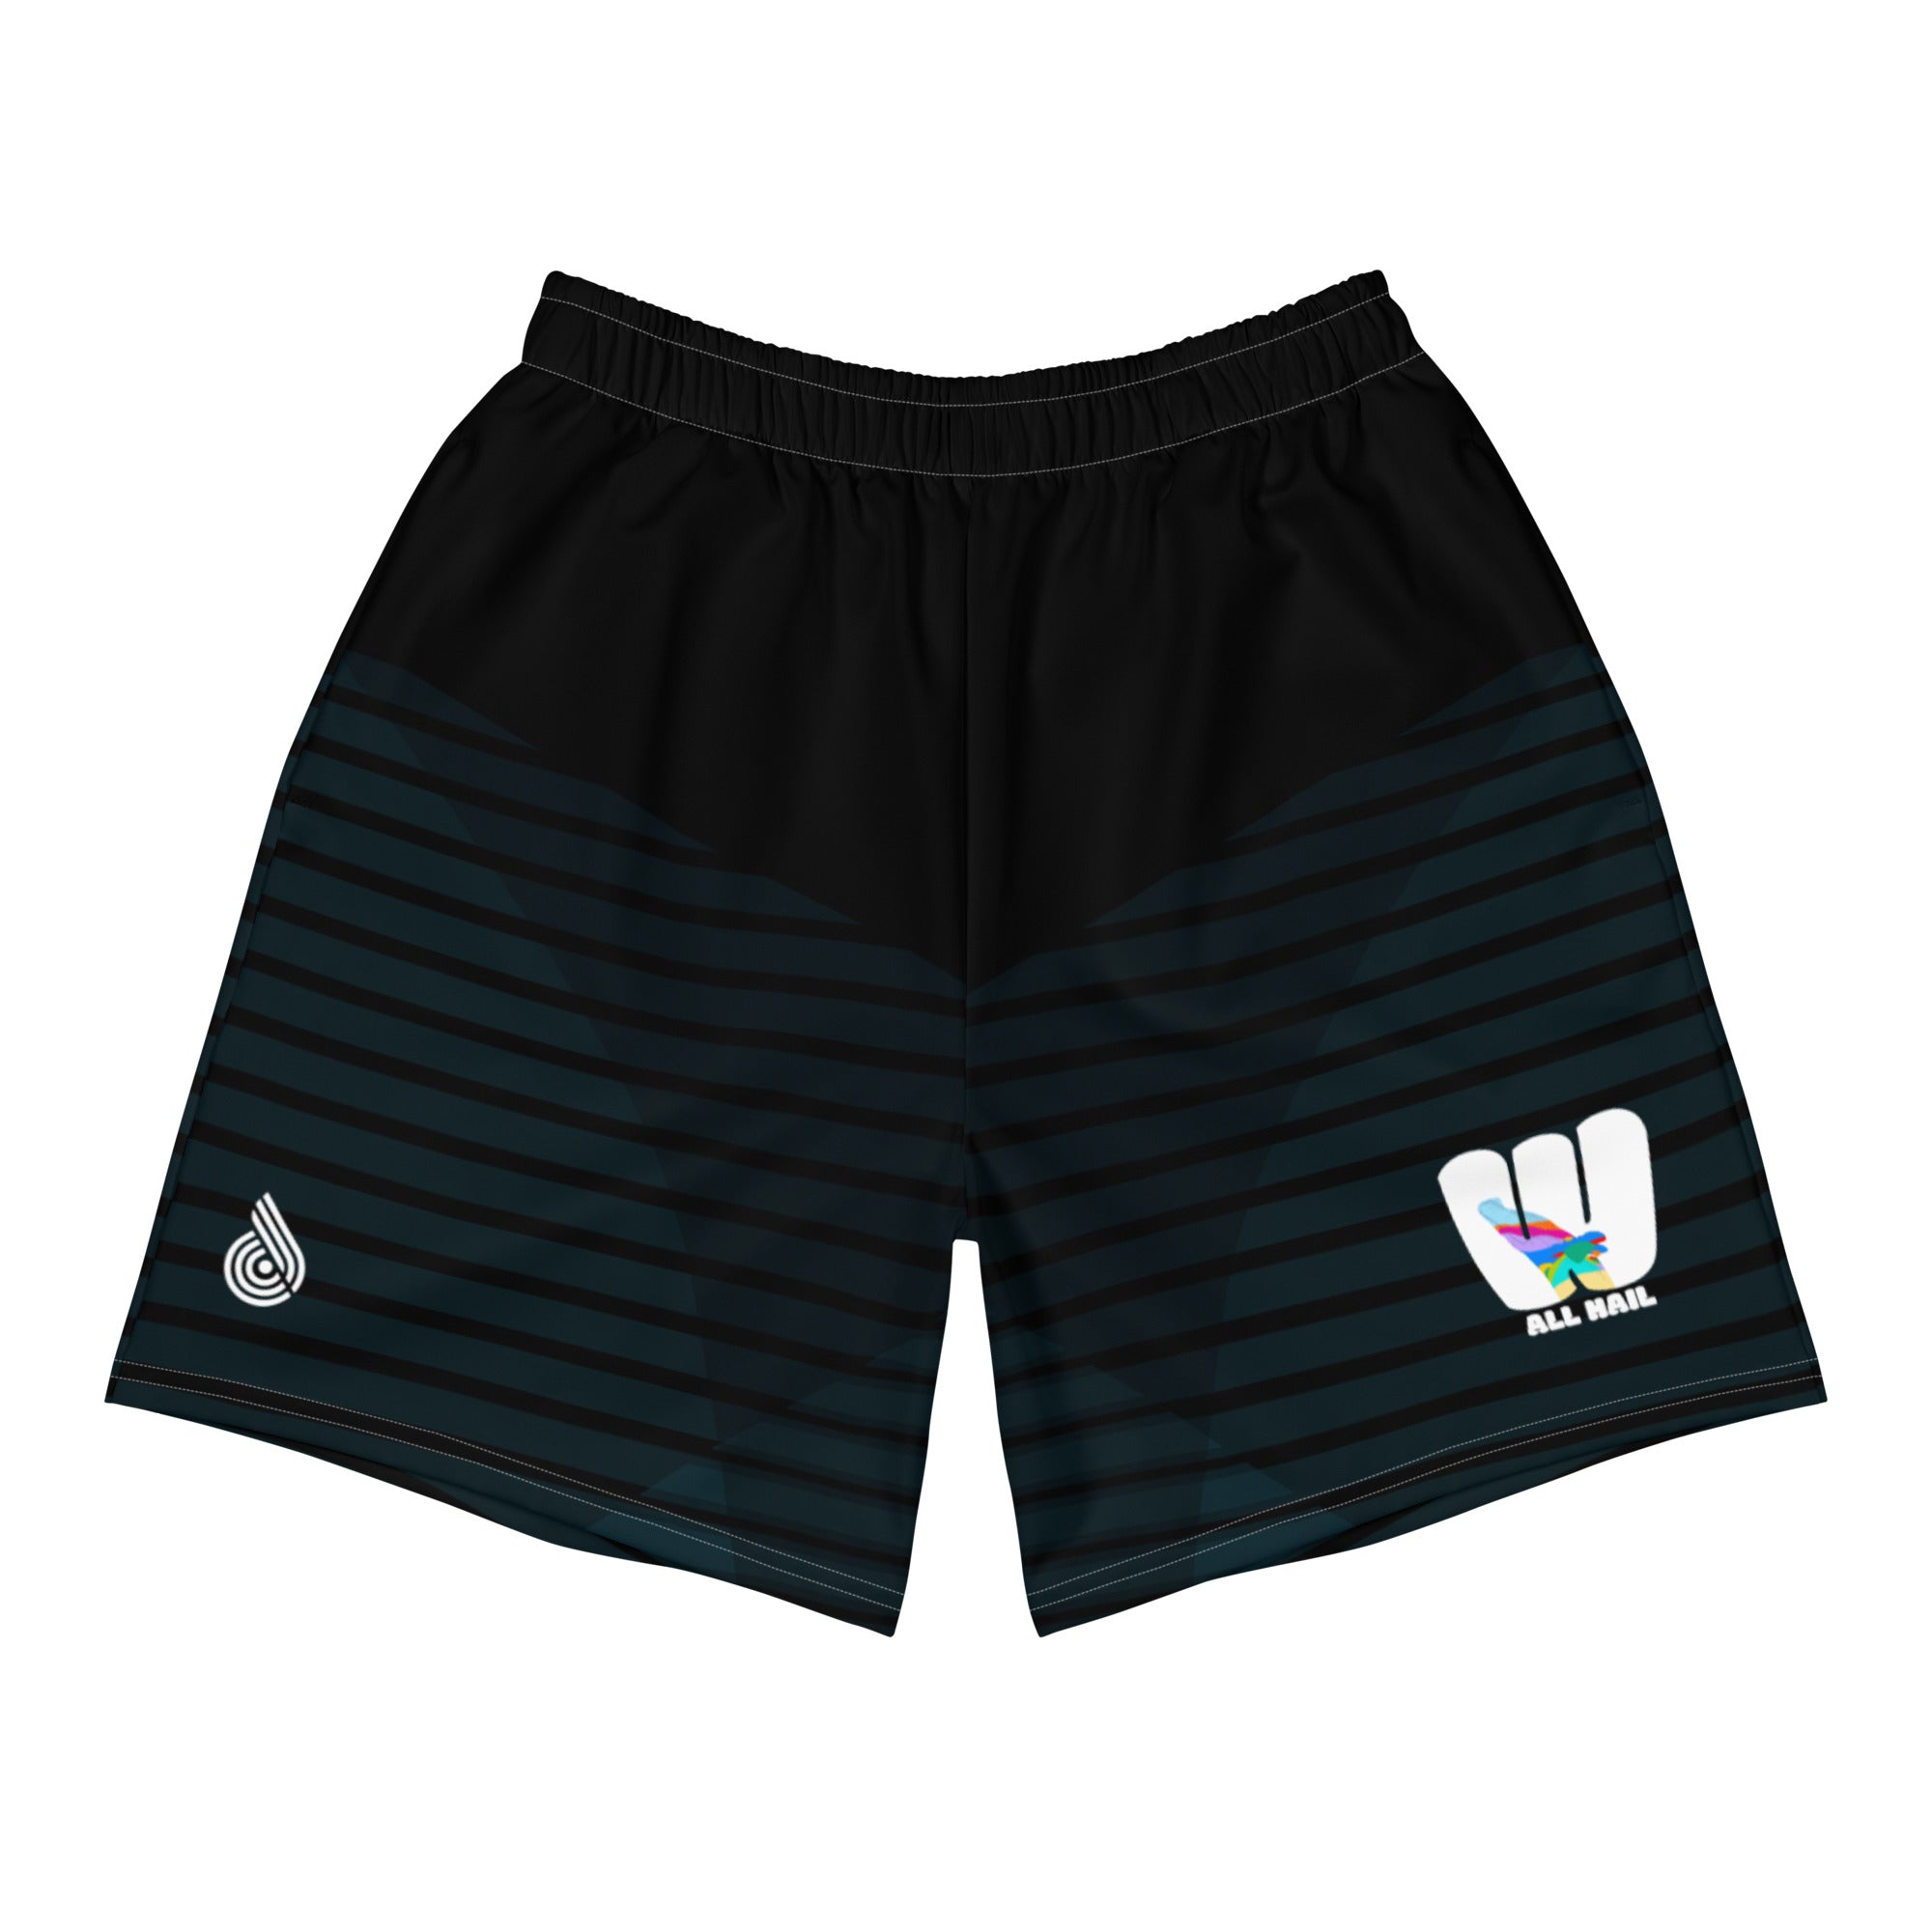 Whalers Men's Athletic Shorts